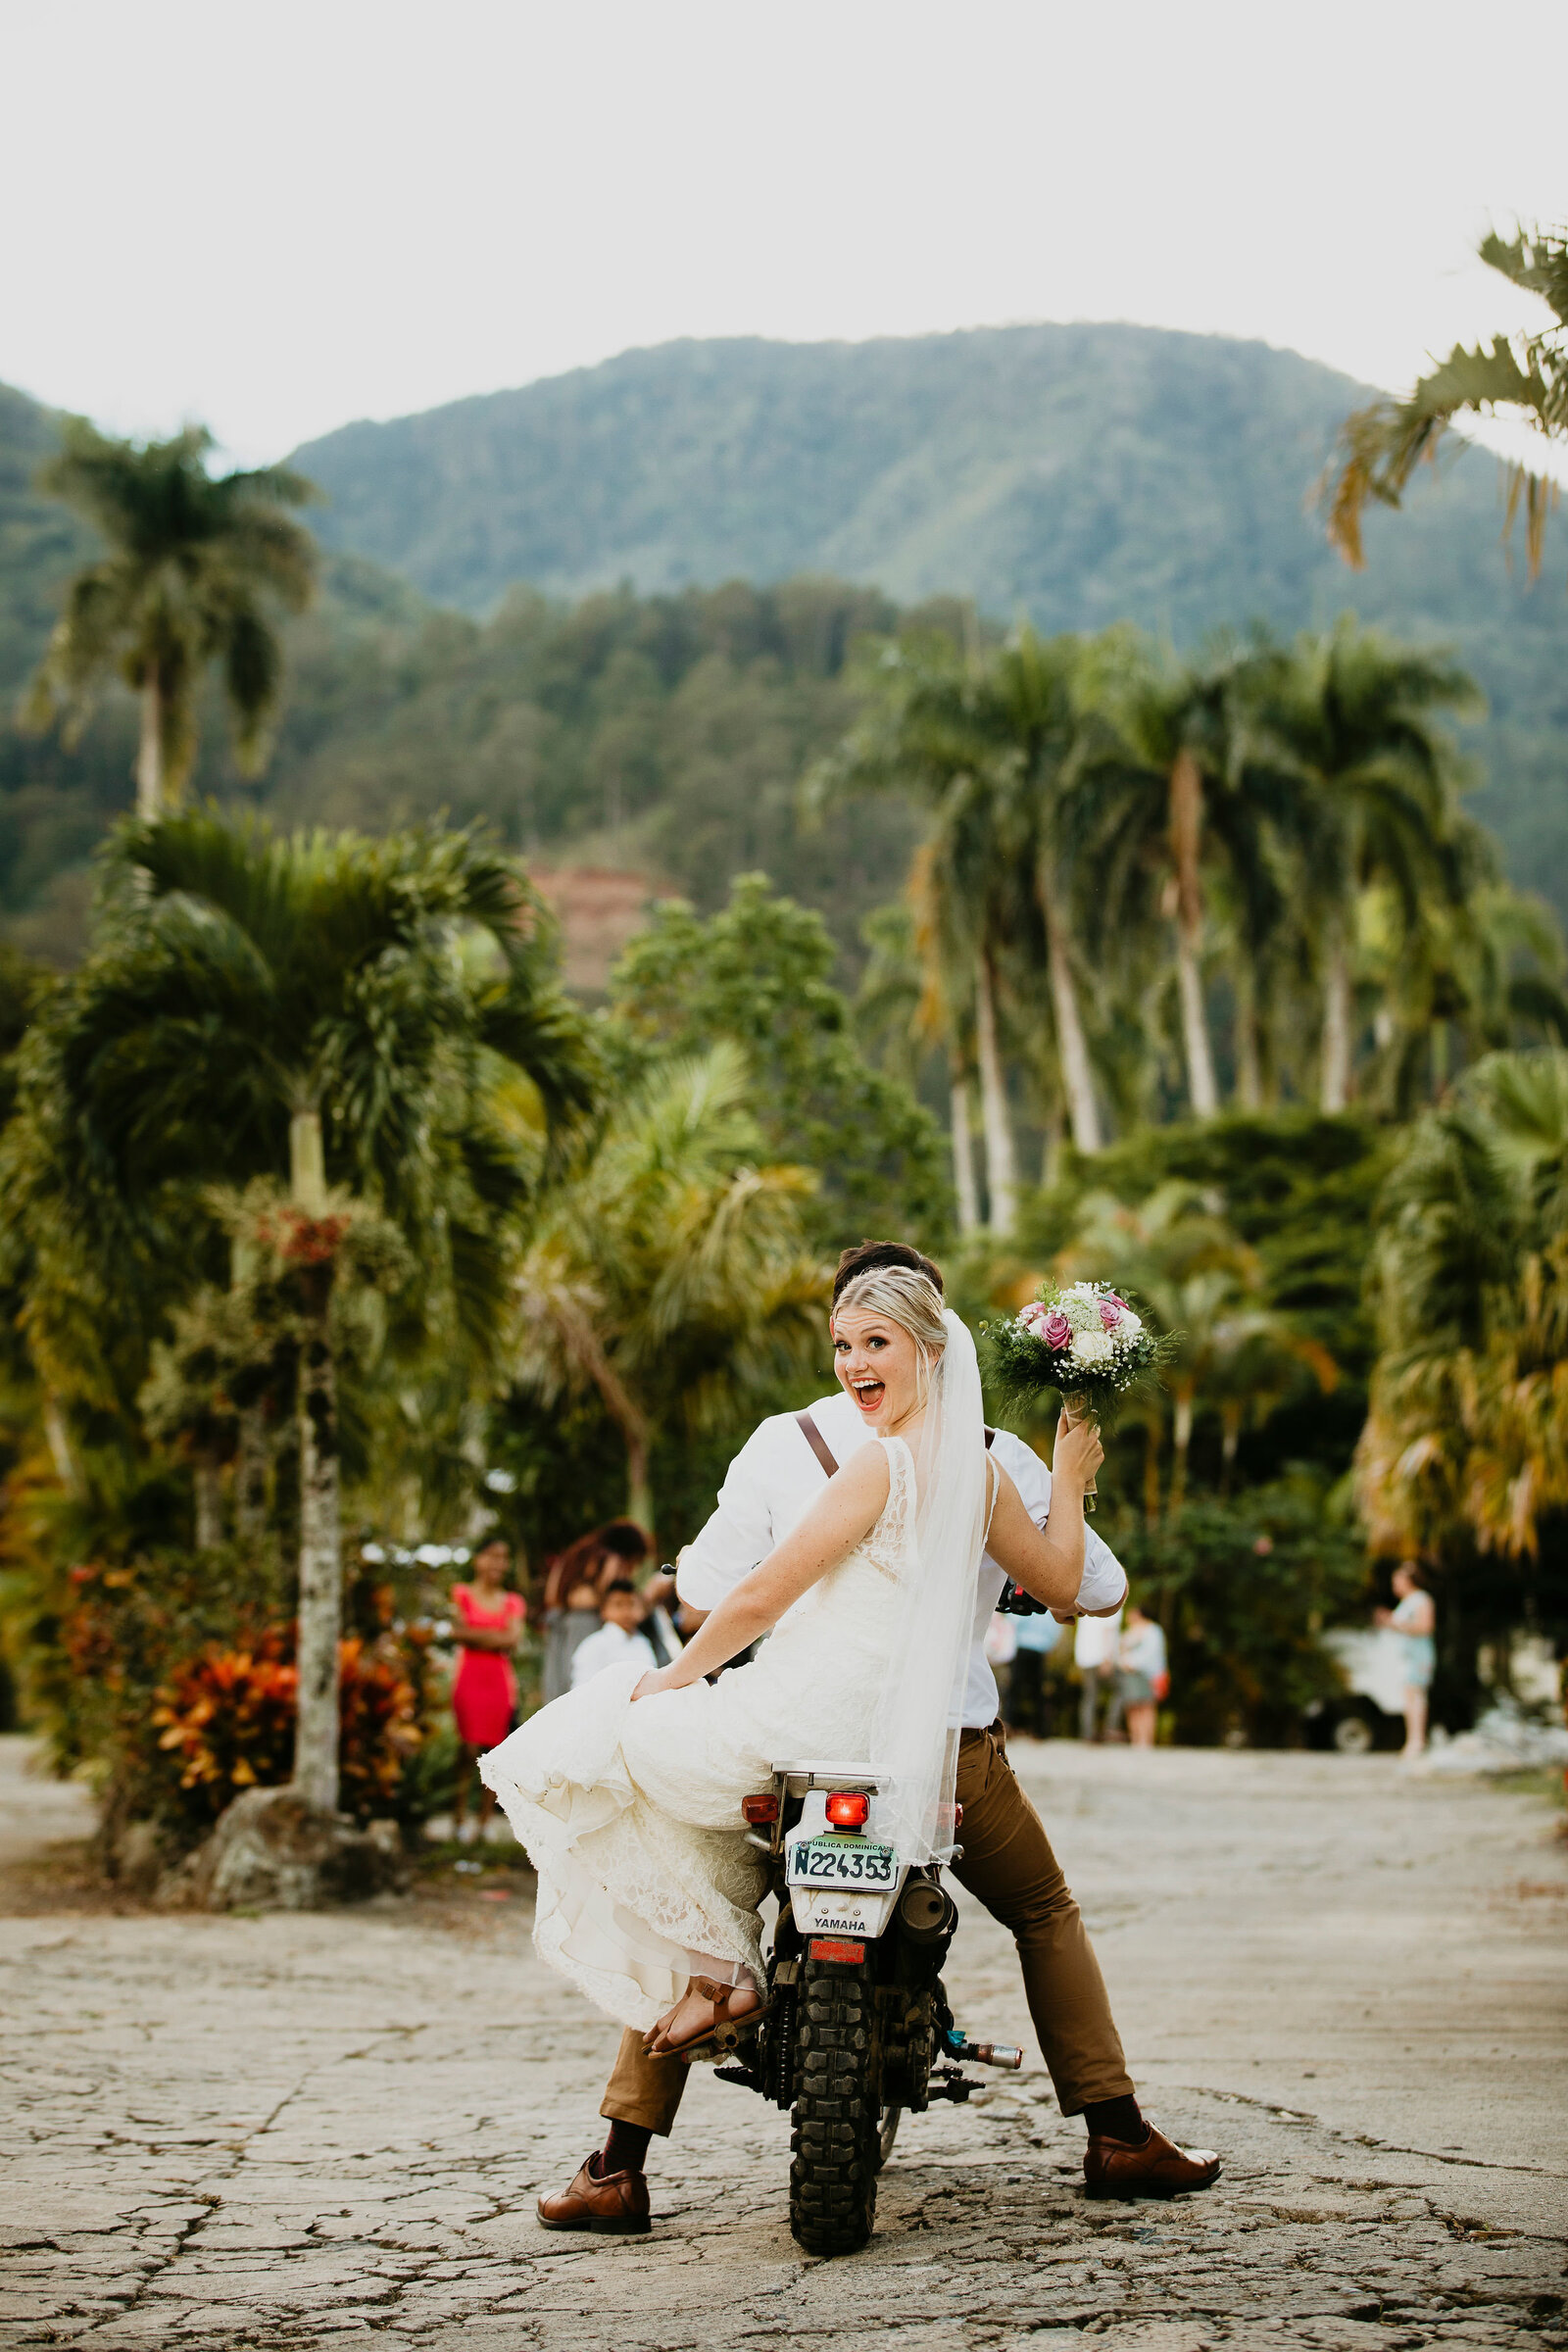 Eloping in the Dominican Republic + Where to elope in the DR